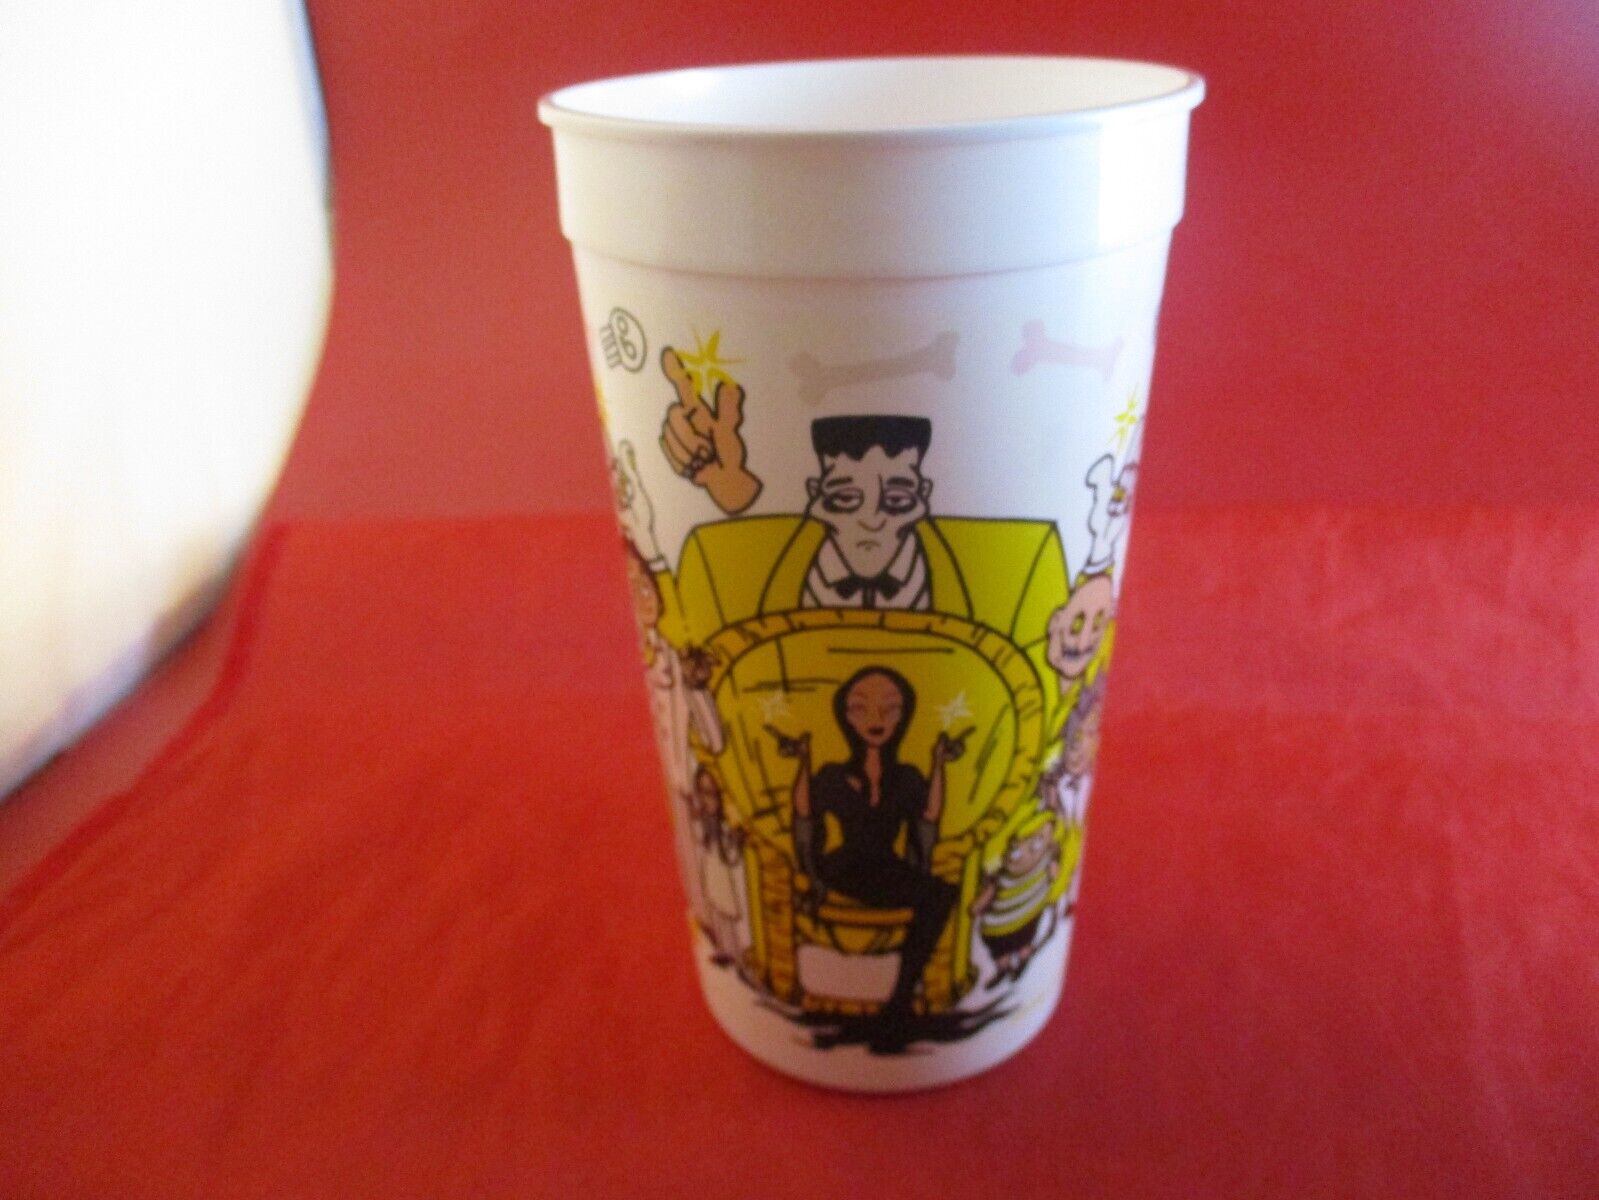 Addams Family Animated TV Show Series 1992 Promotional Plastic Cup RARE 